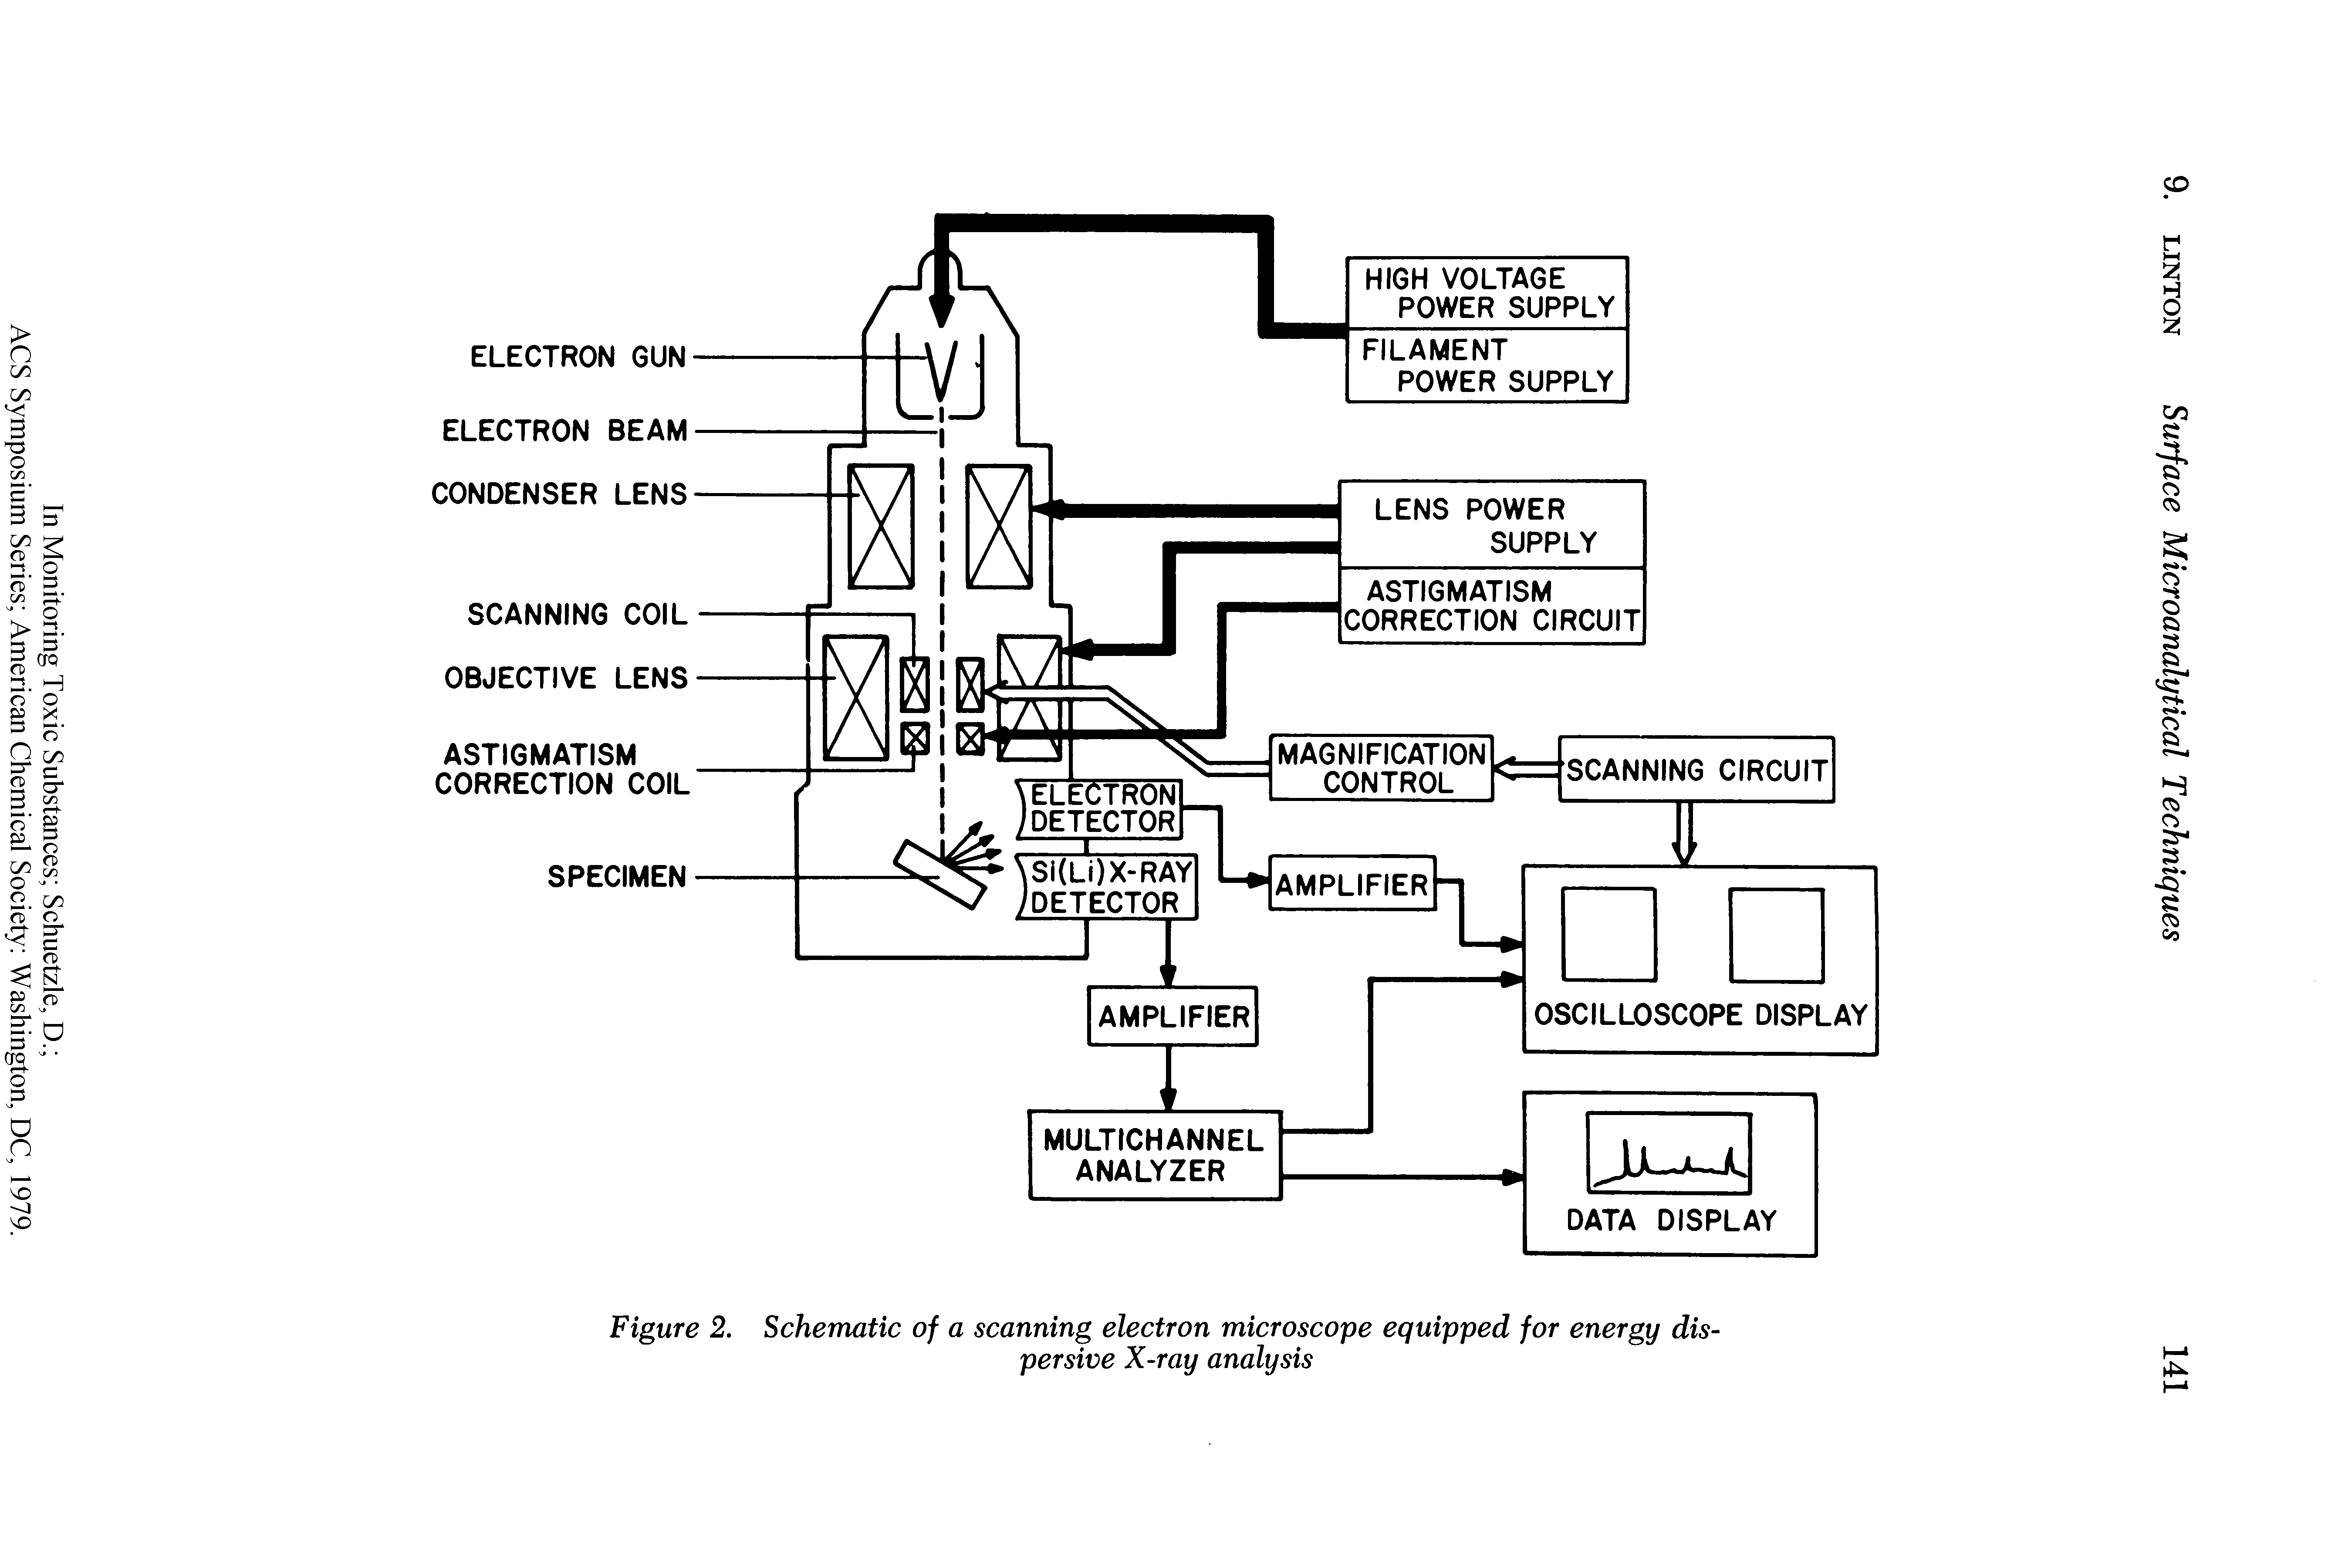 Figure 2. Schematic of a scanning electron microscope equipped for energy dispersive X-ray analysis...